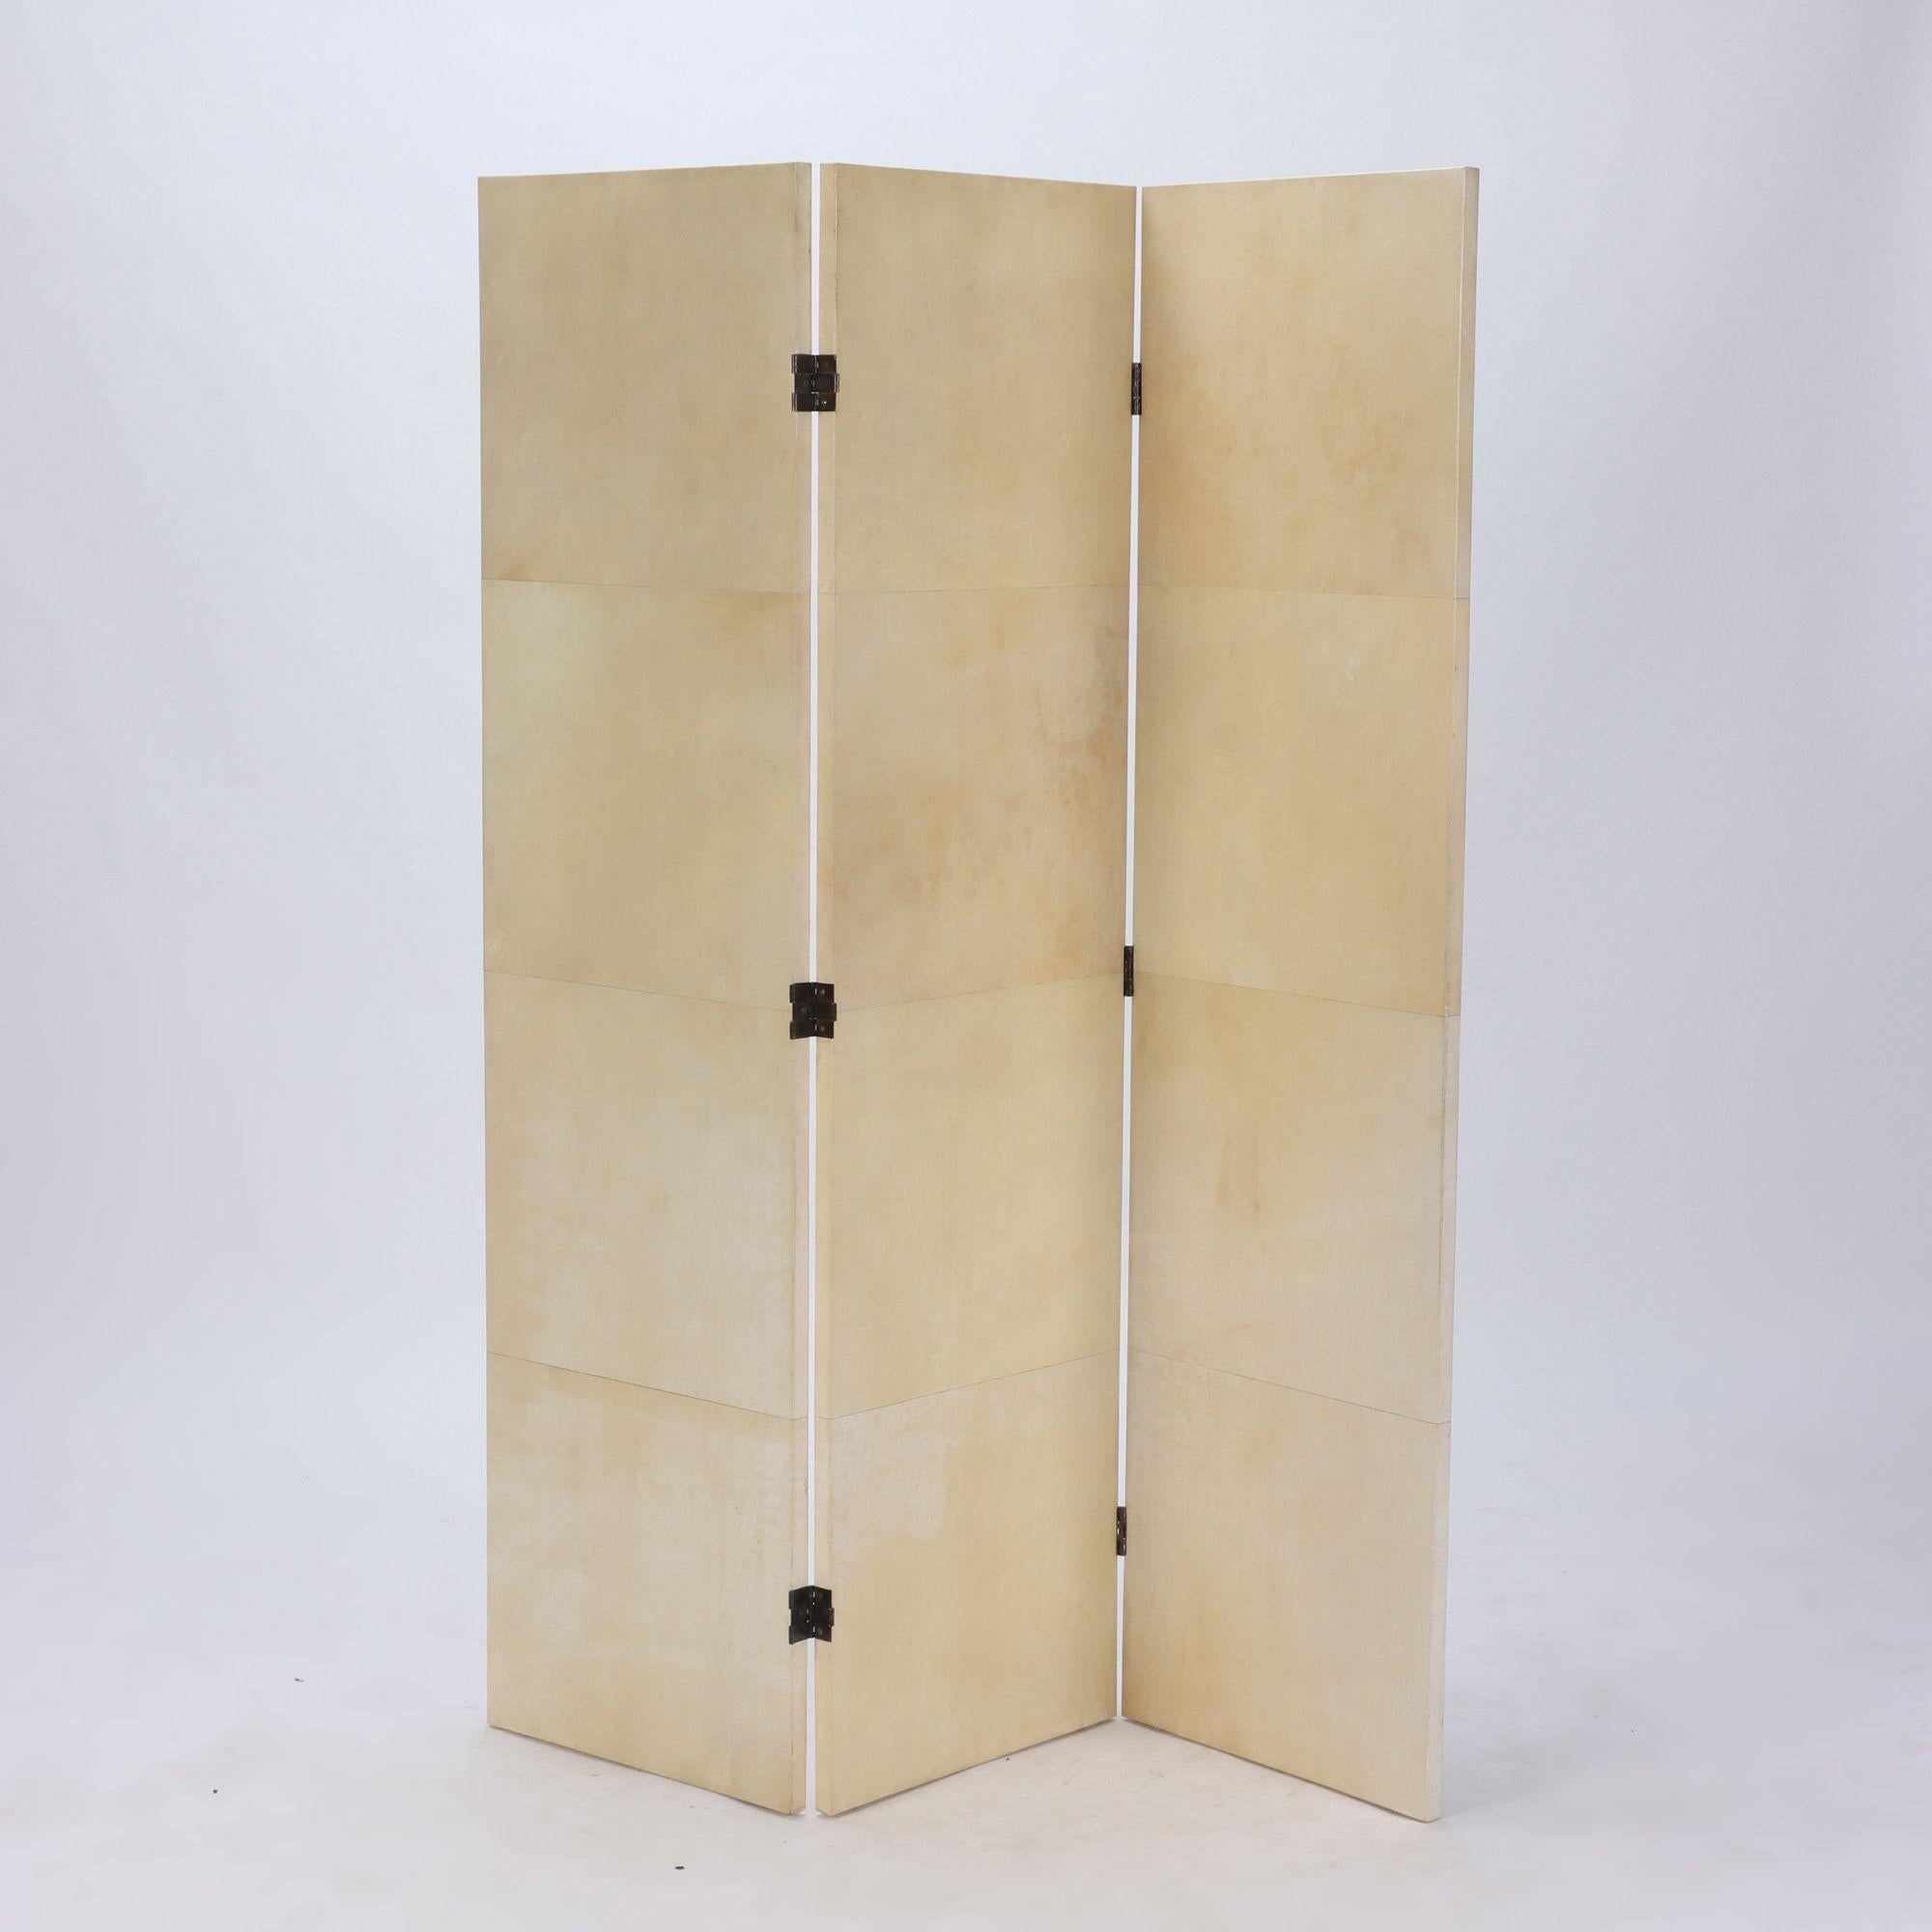 A pair of parchment covered three panel folding screens.Contemporary. Each screen is 58